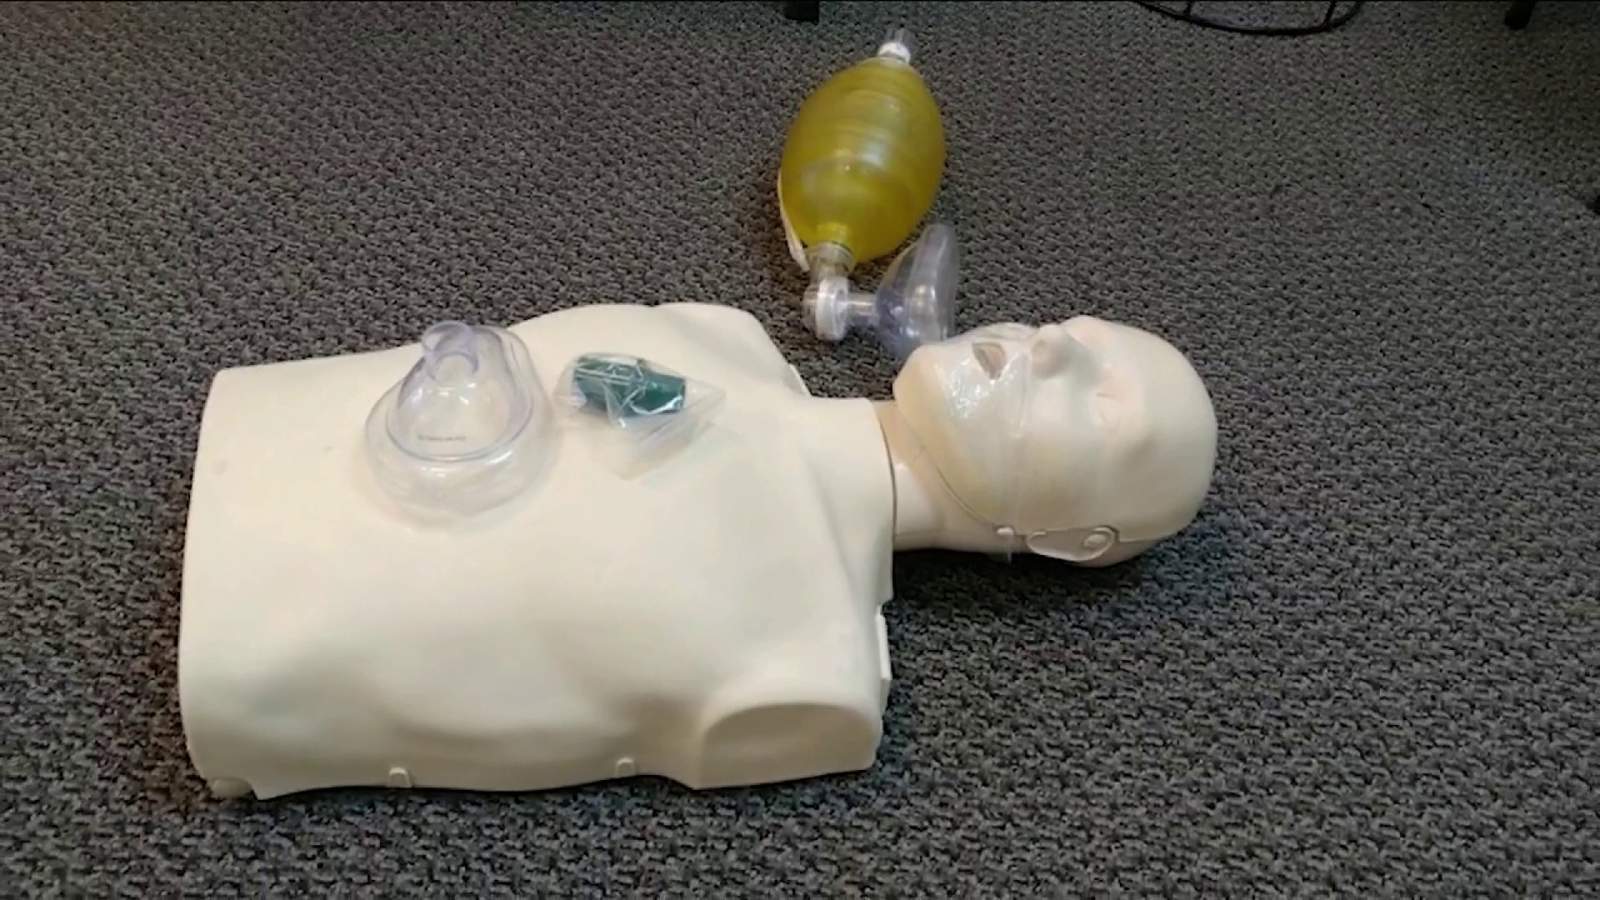 CPR training could become mandatory for Florida students